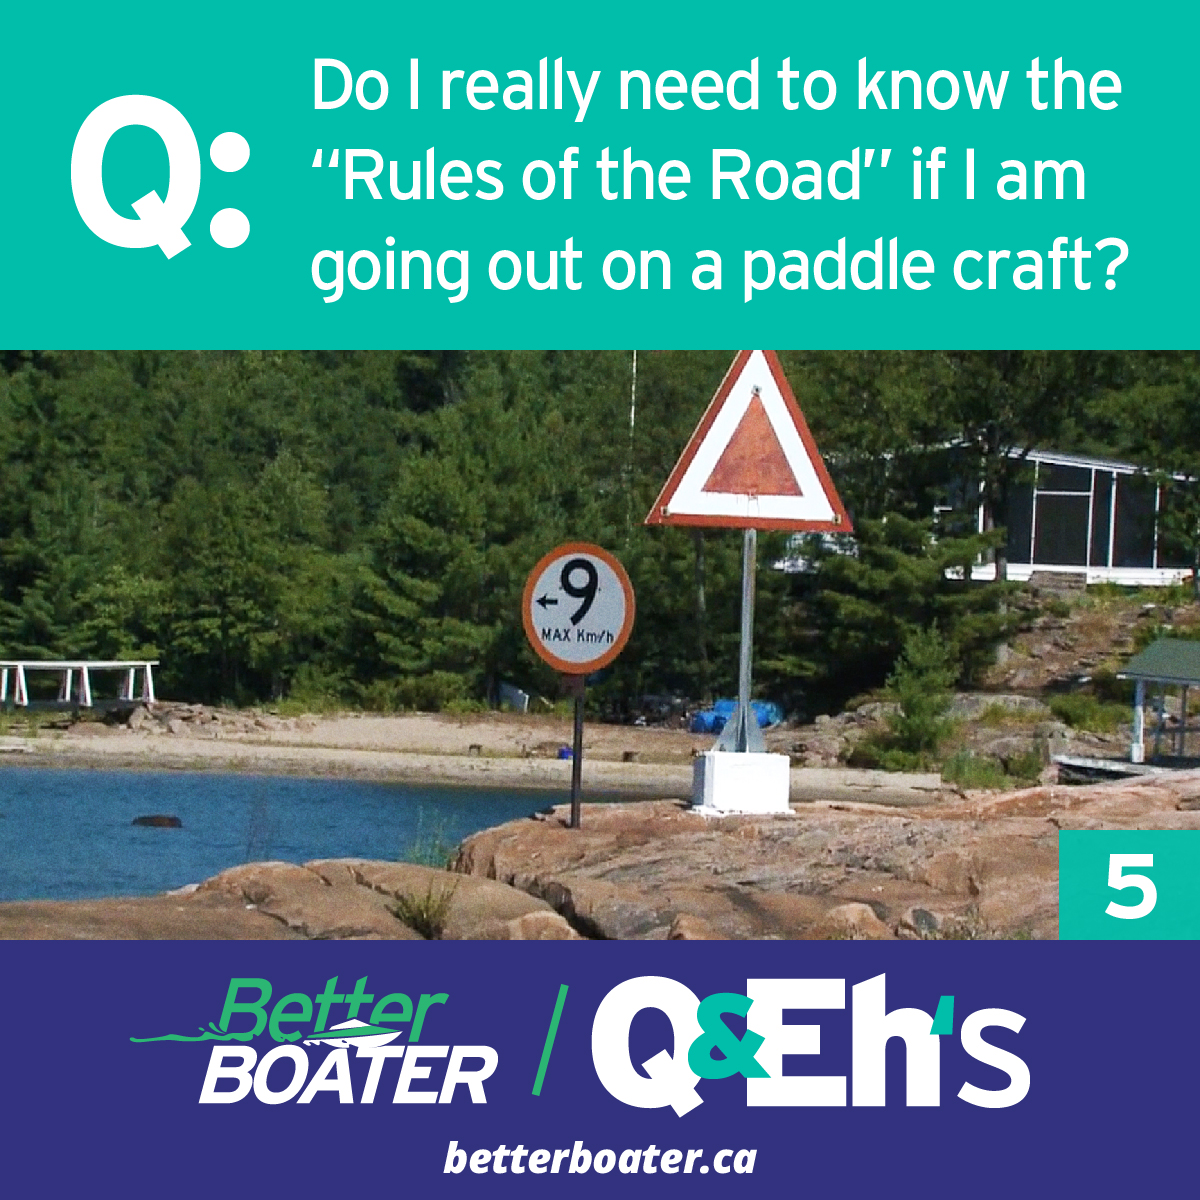 https://betterboater.ca/Paddling%20Rules